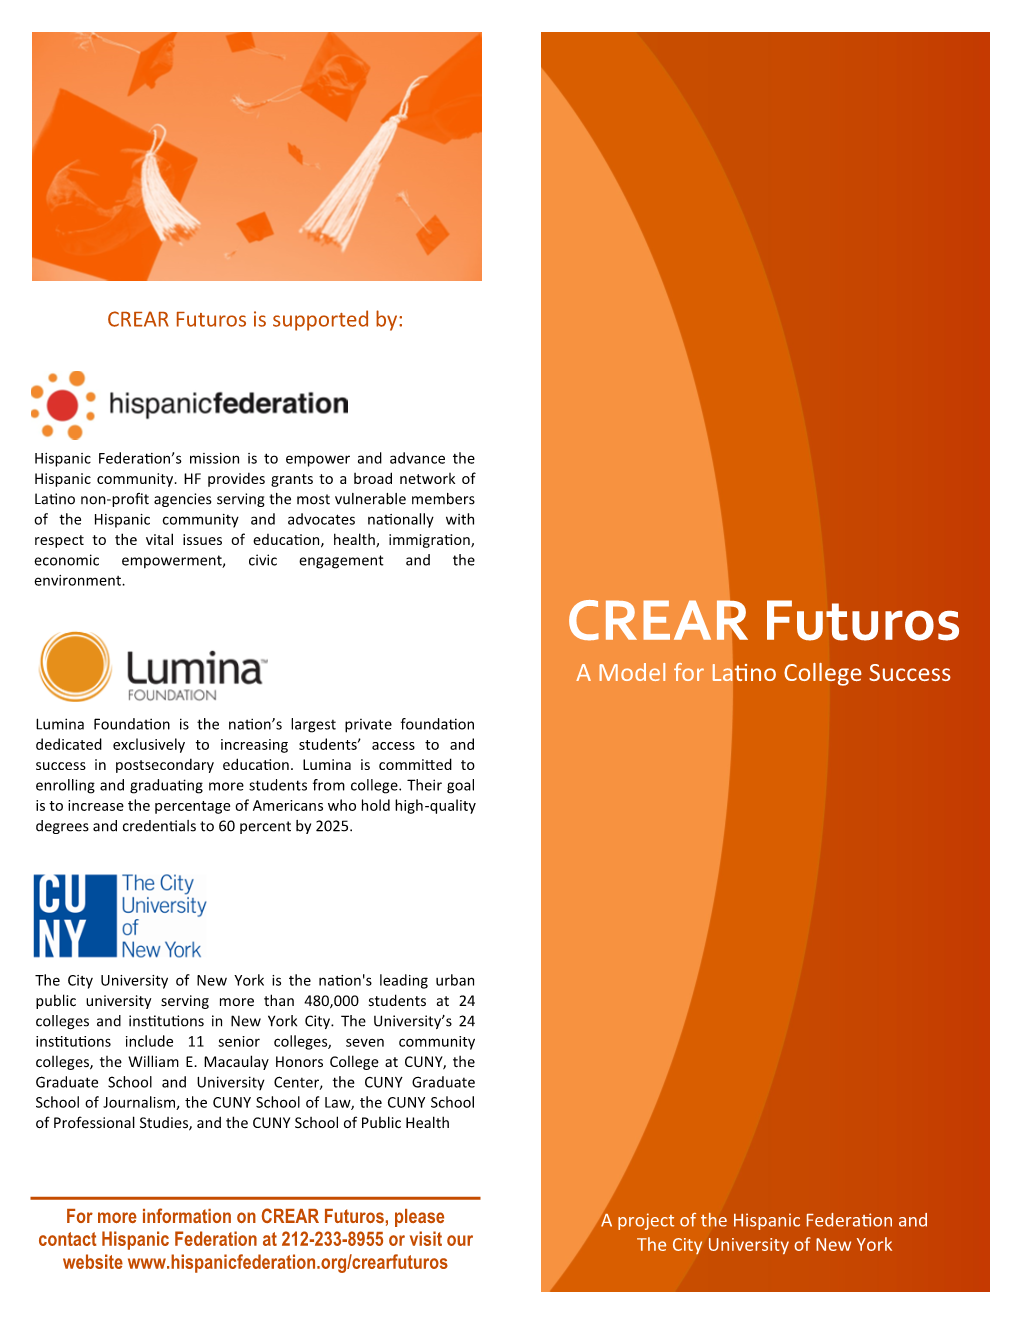 CREAR Futuros Is Supported By